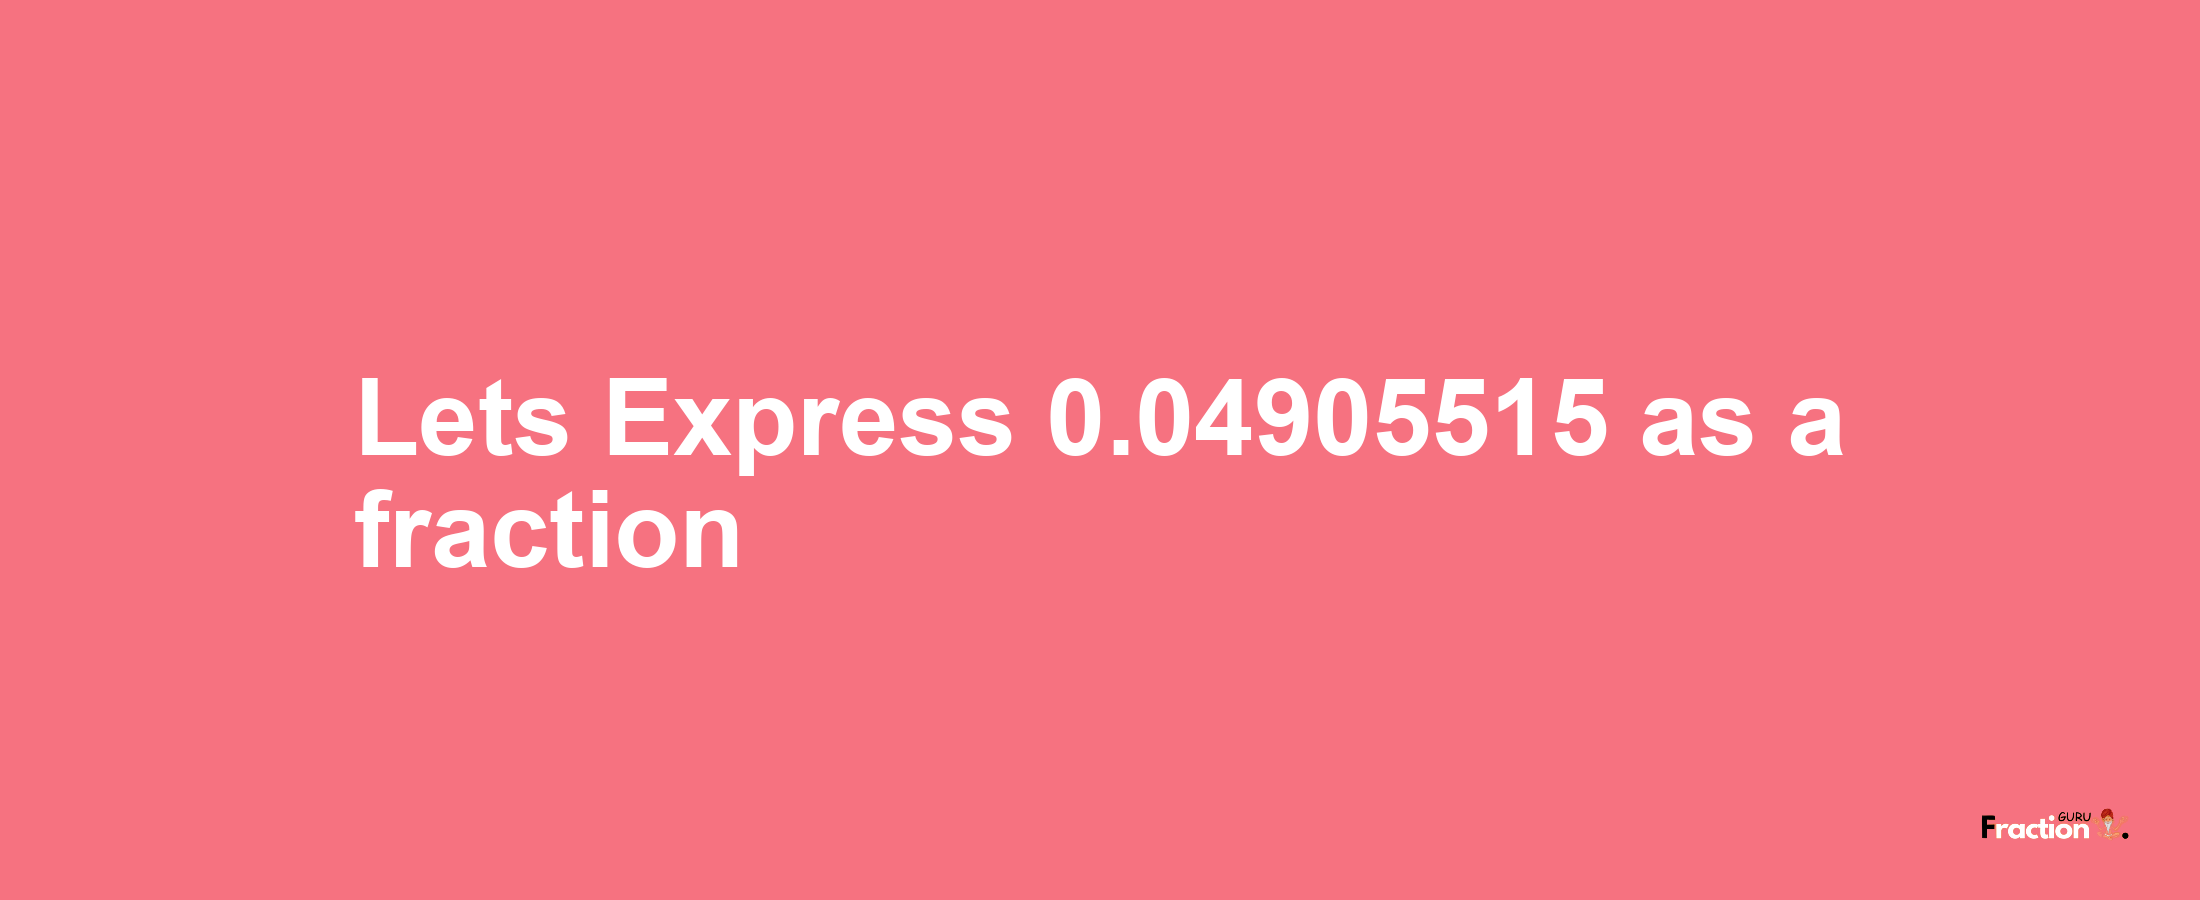 Lets Express 0.04905515 as afraction